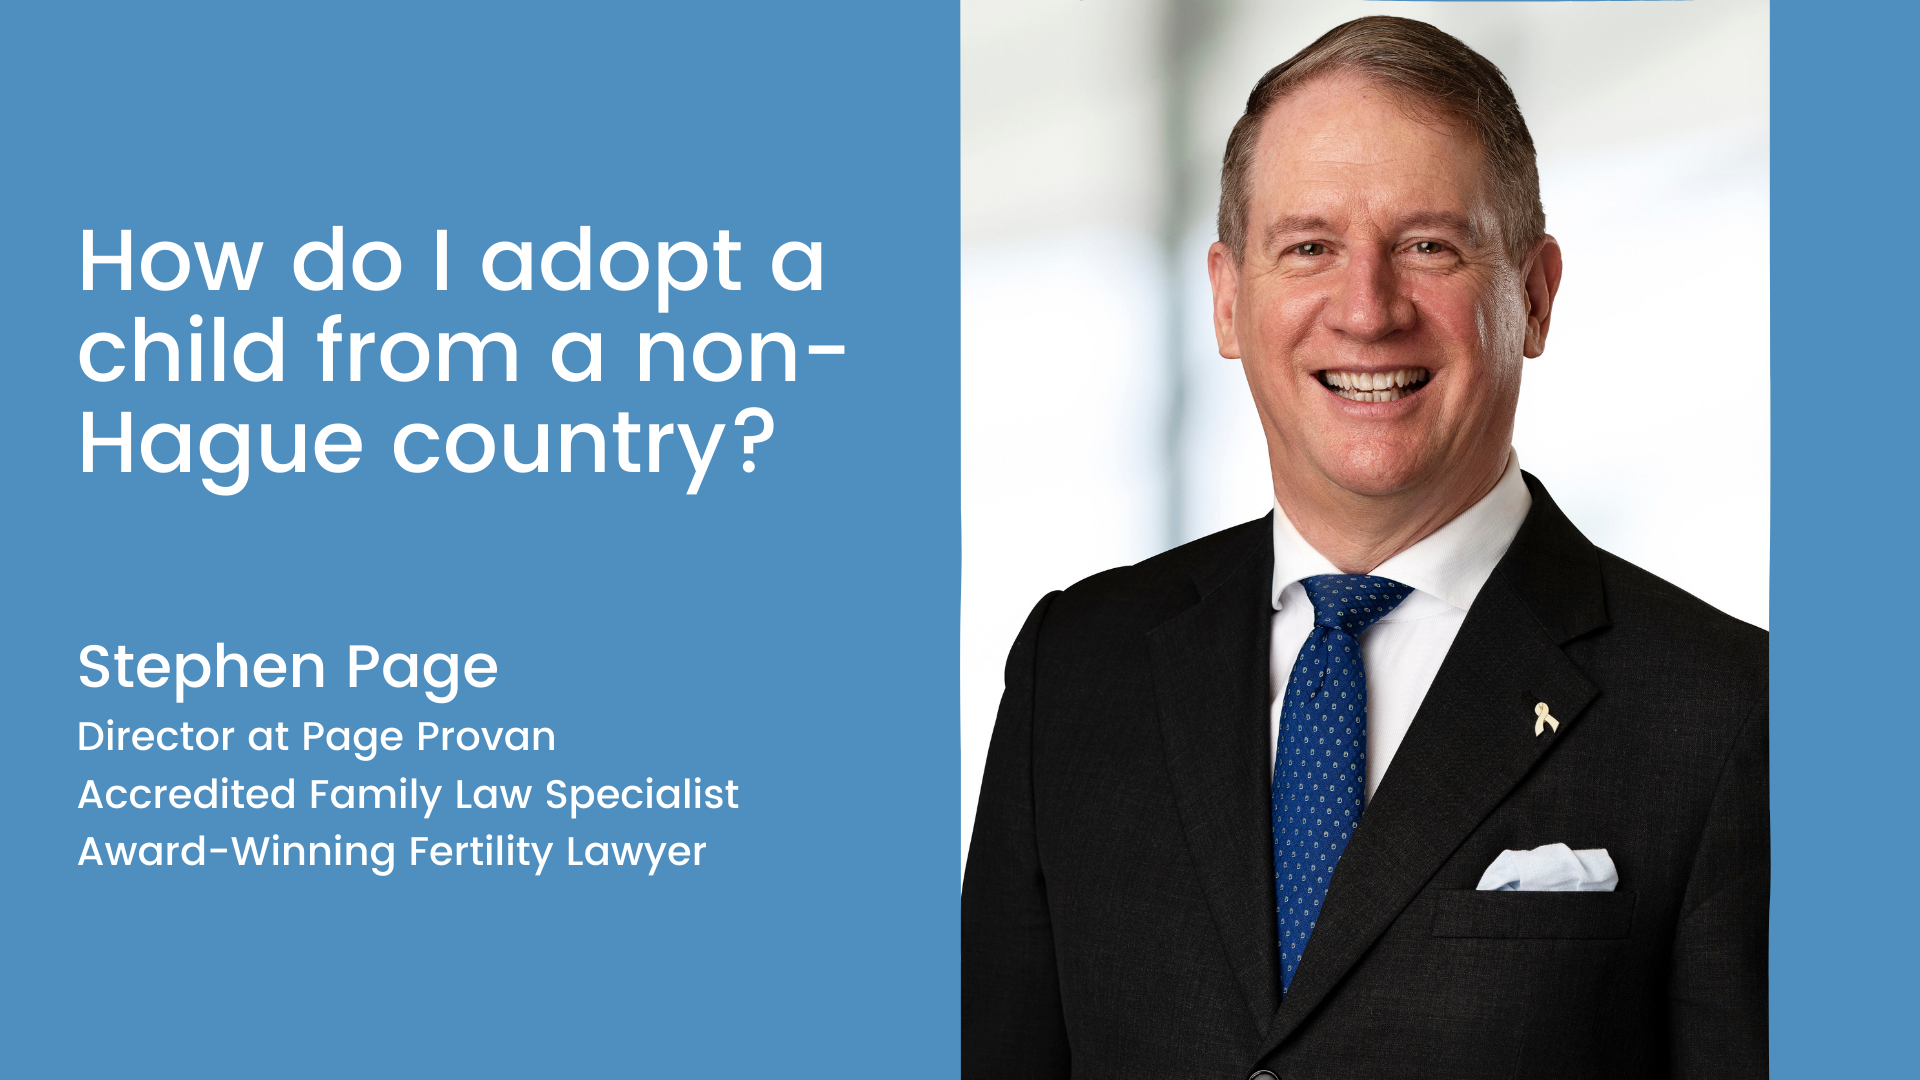 How do I adopt a child from a nonHague country? Page Provan